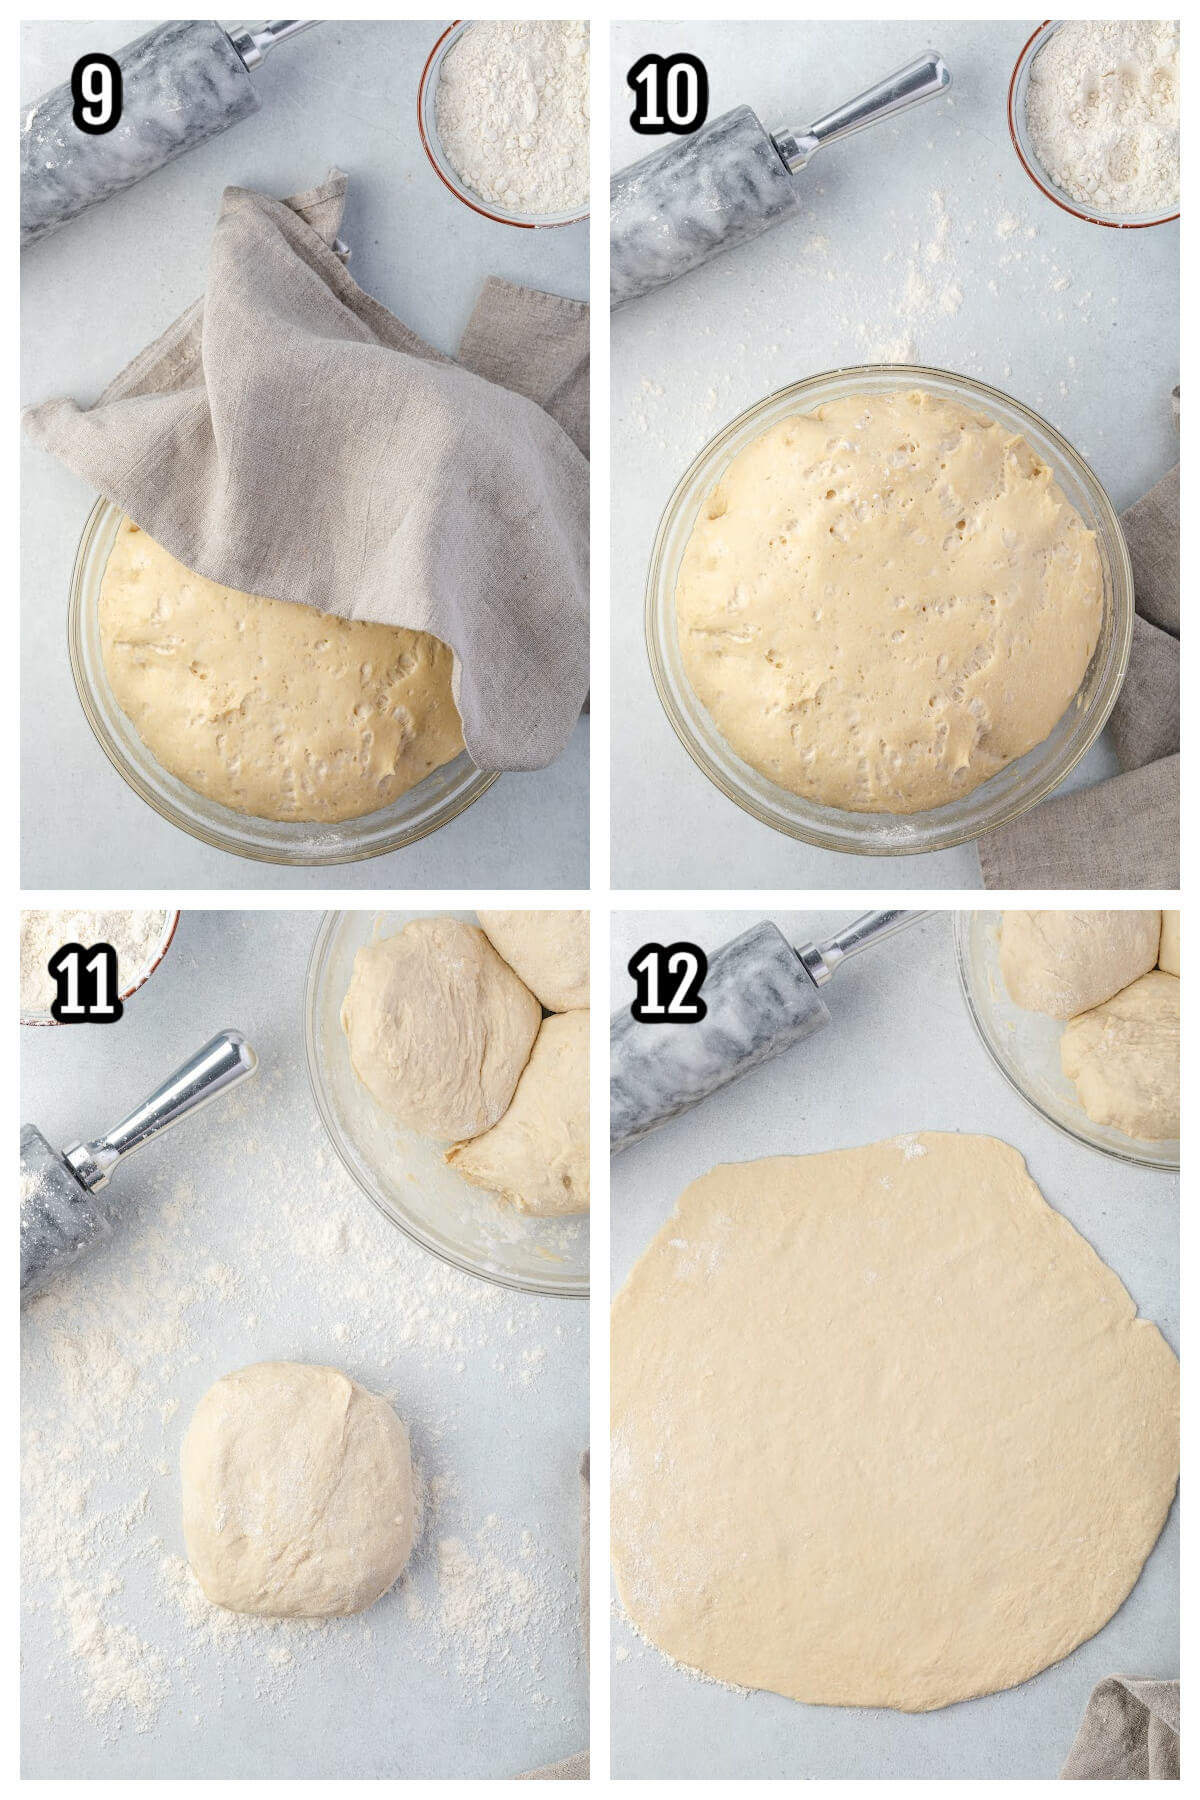 Third set of four steps to making Pizza rustica. 